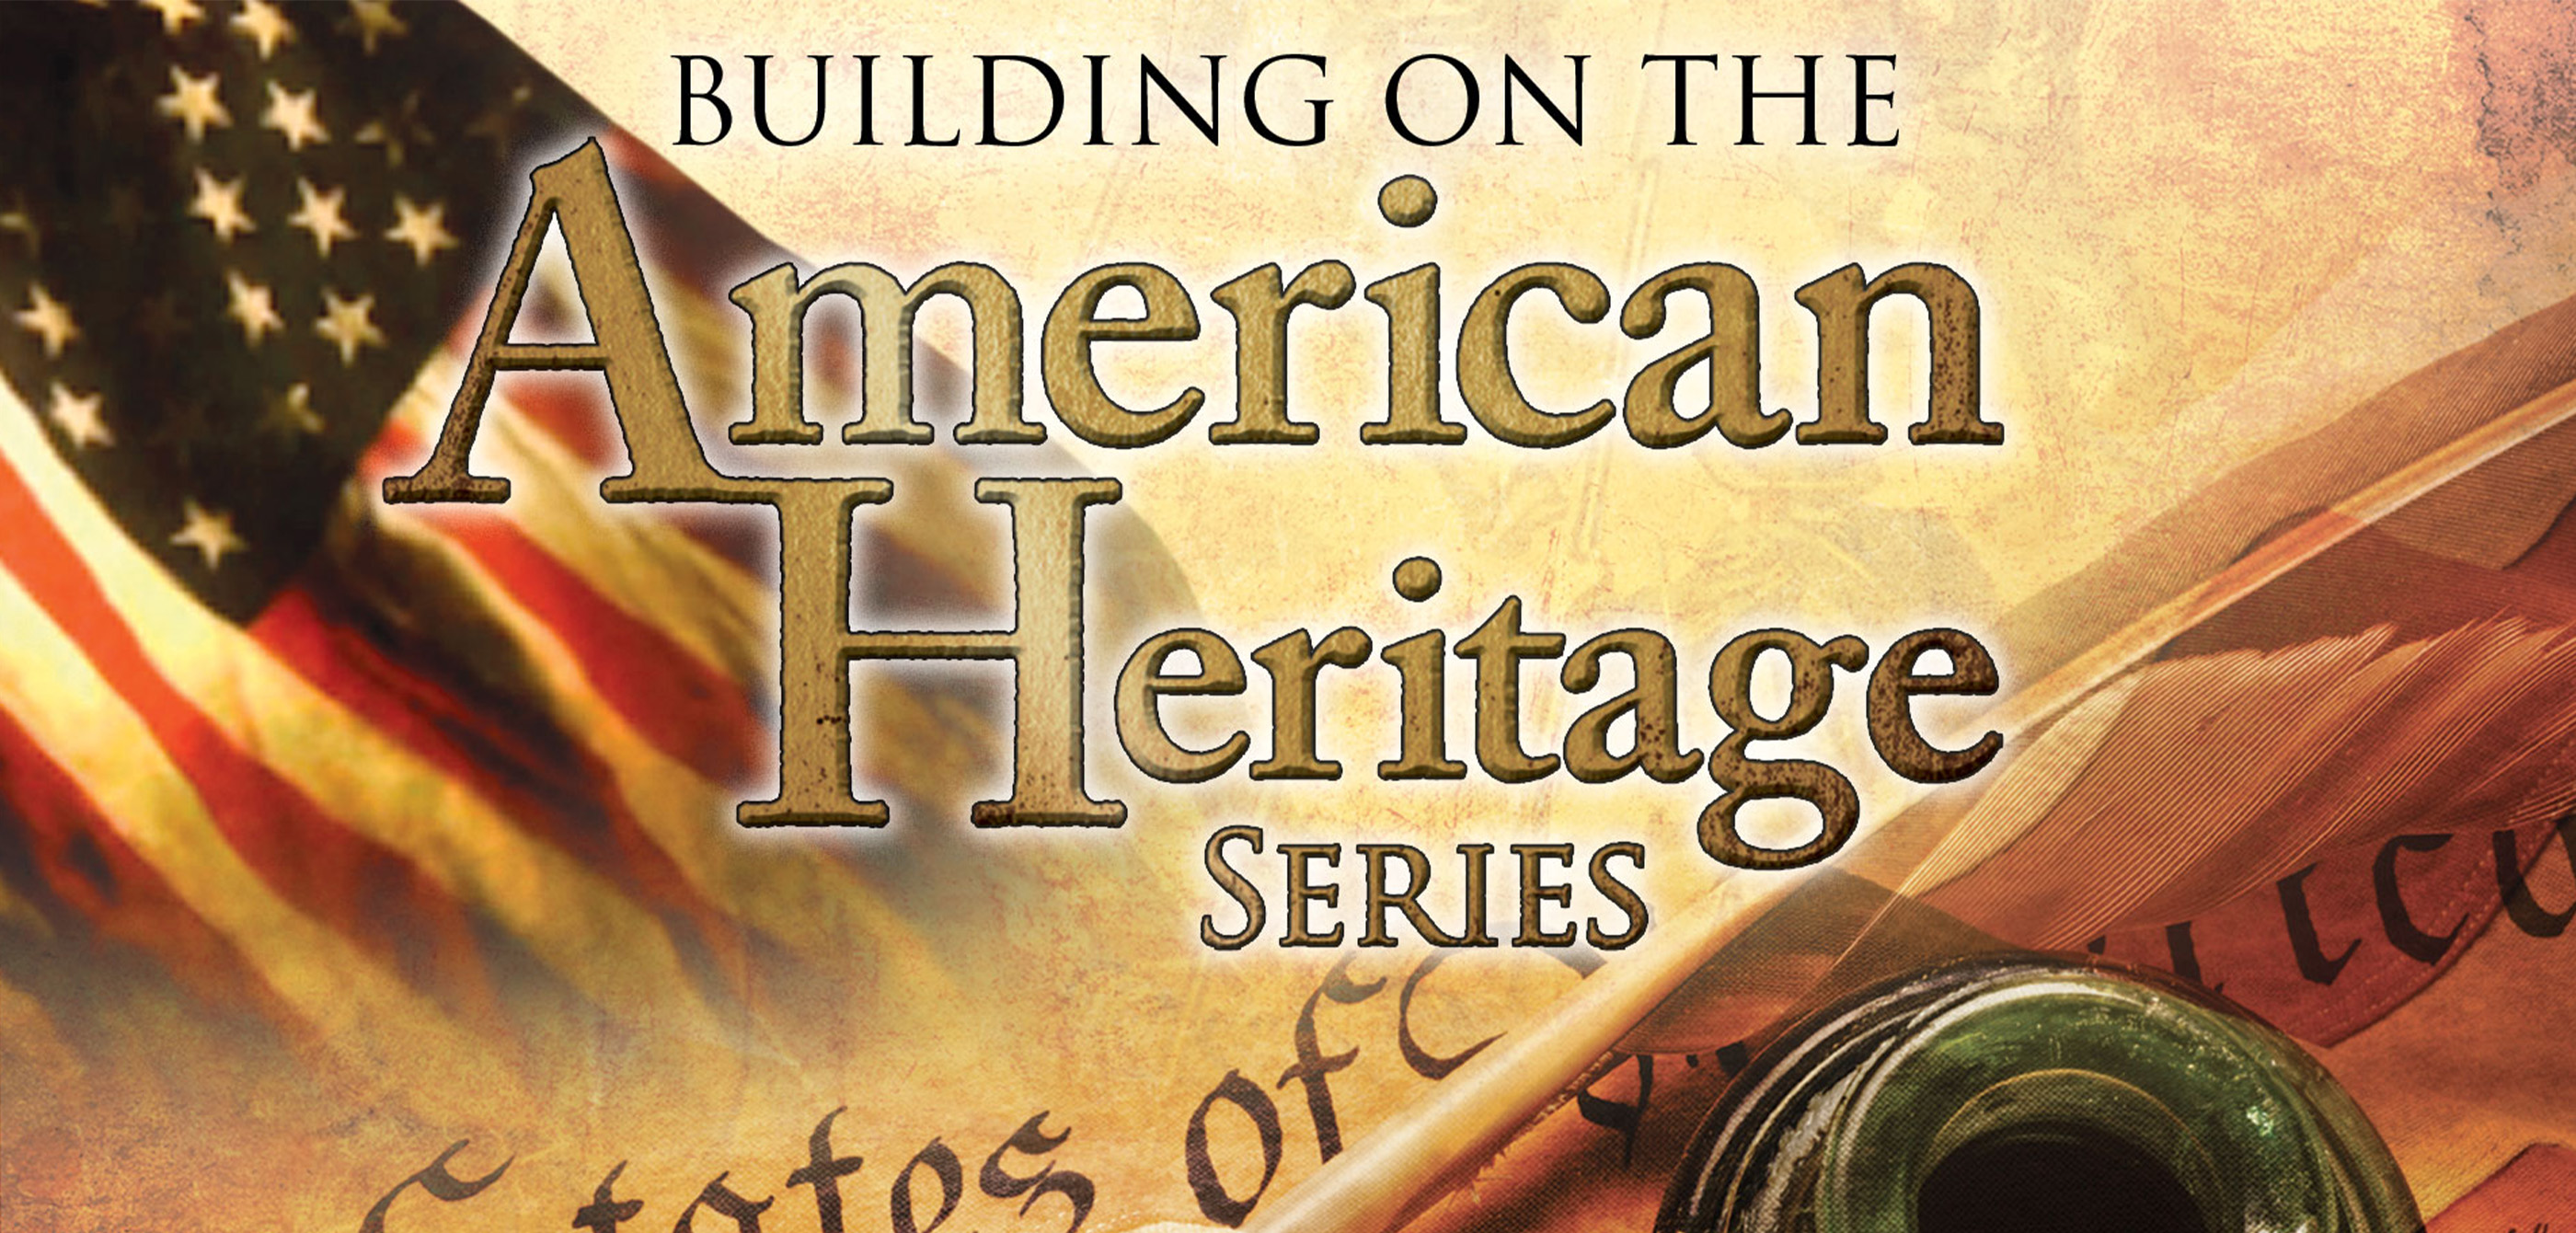 Building on the American Heritage Series